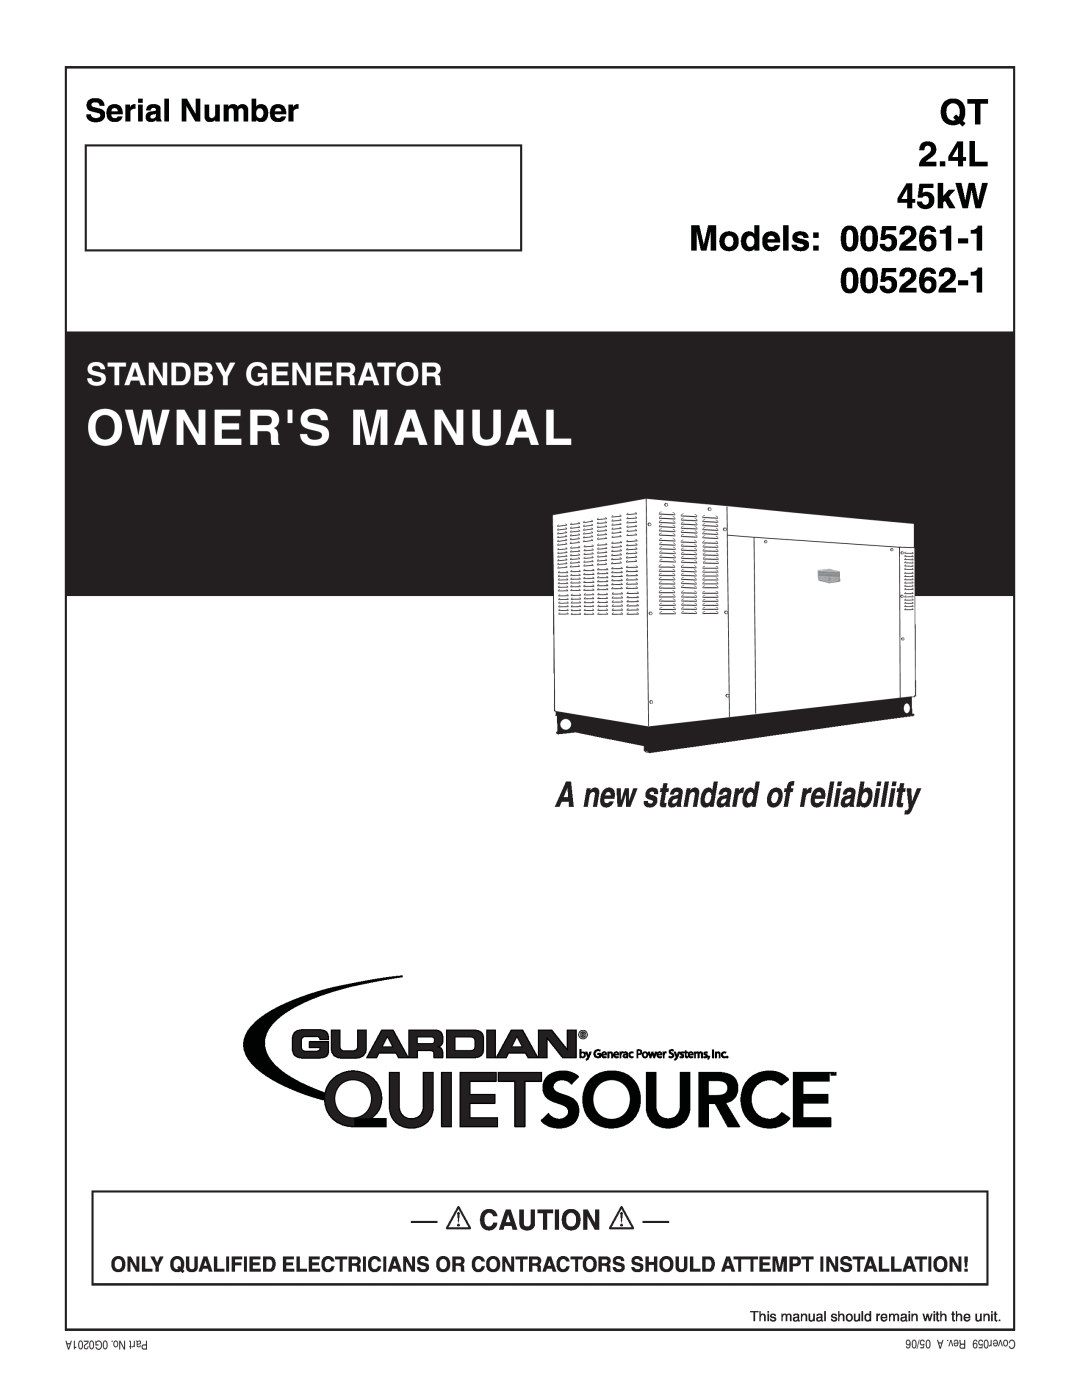 Generac Power Systems 005261-1, 005262-1 owner manual 2.4L 45kW Models, A new standard of reliability, Serial NumberQT 